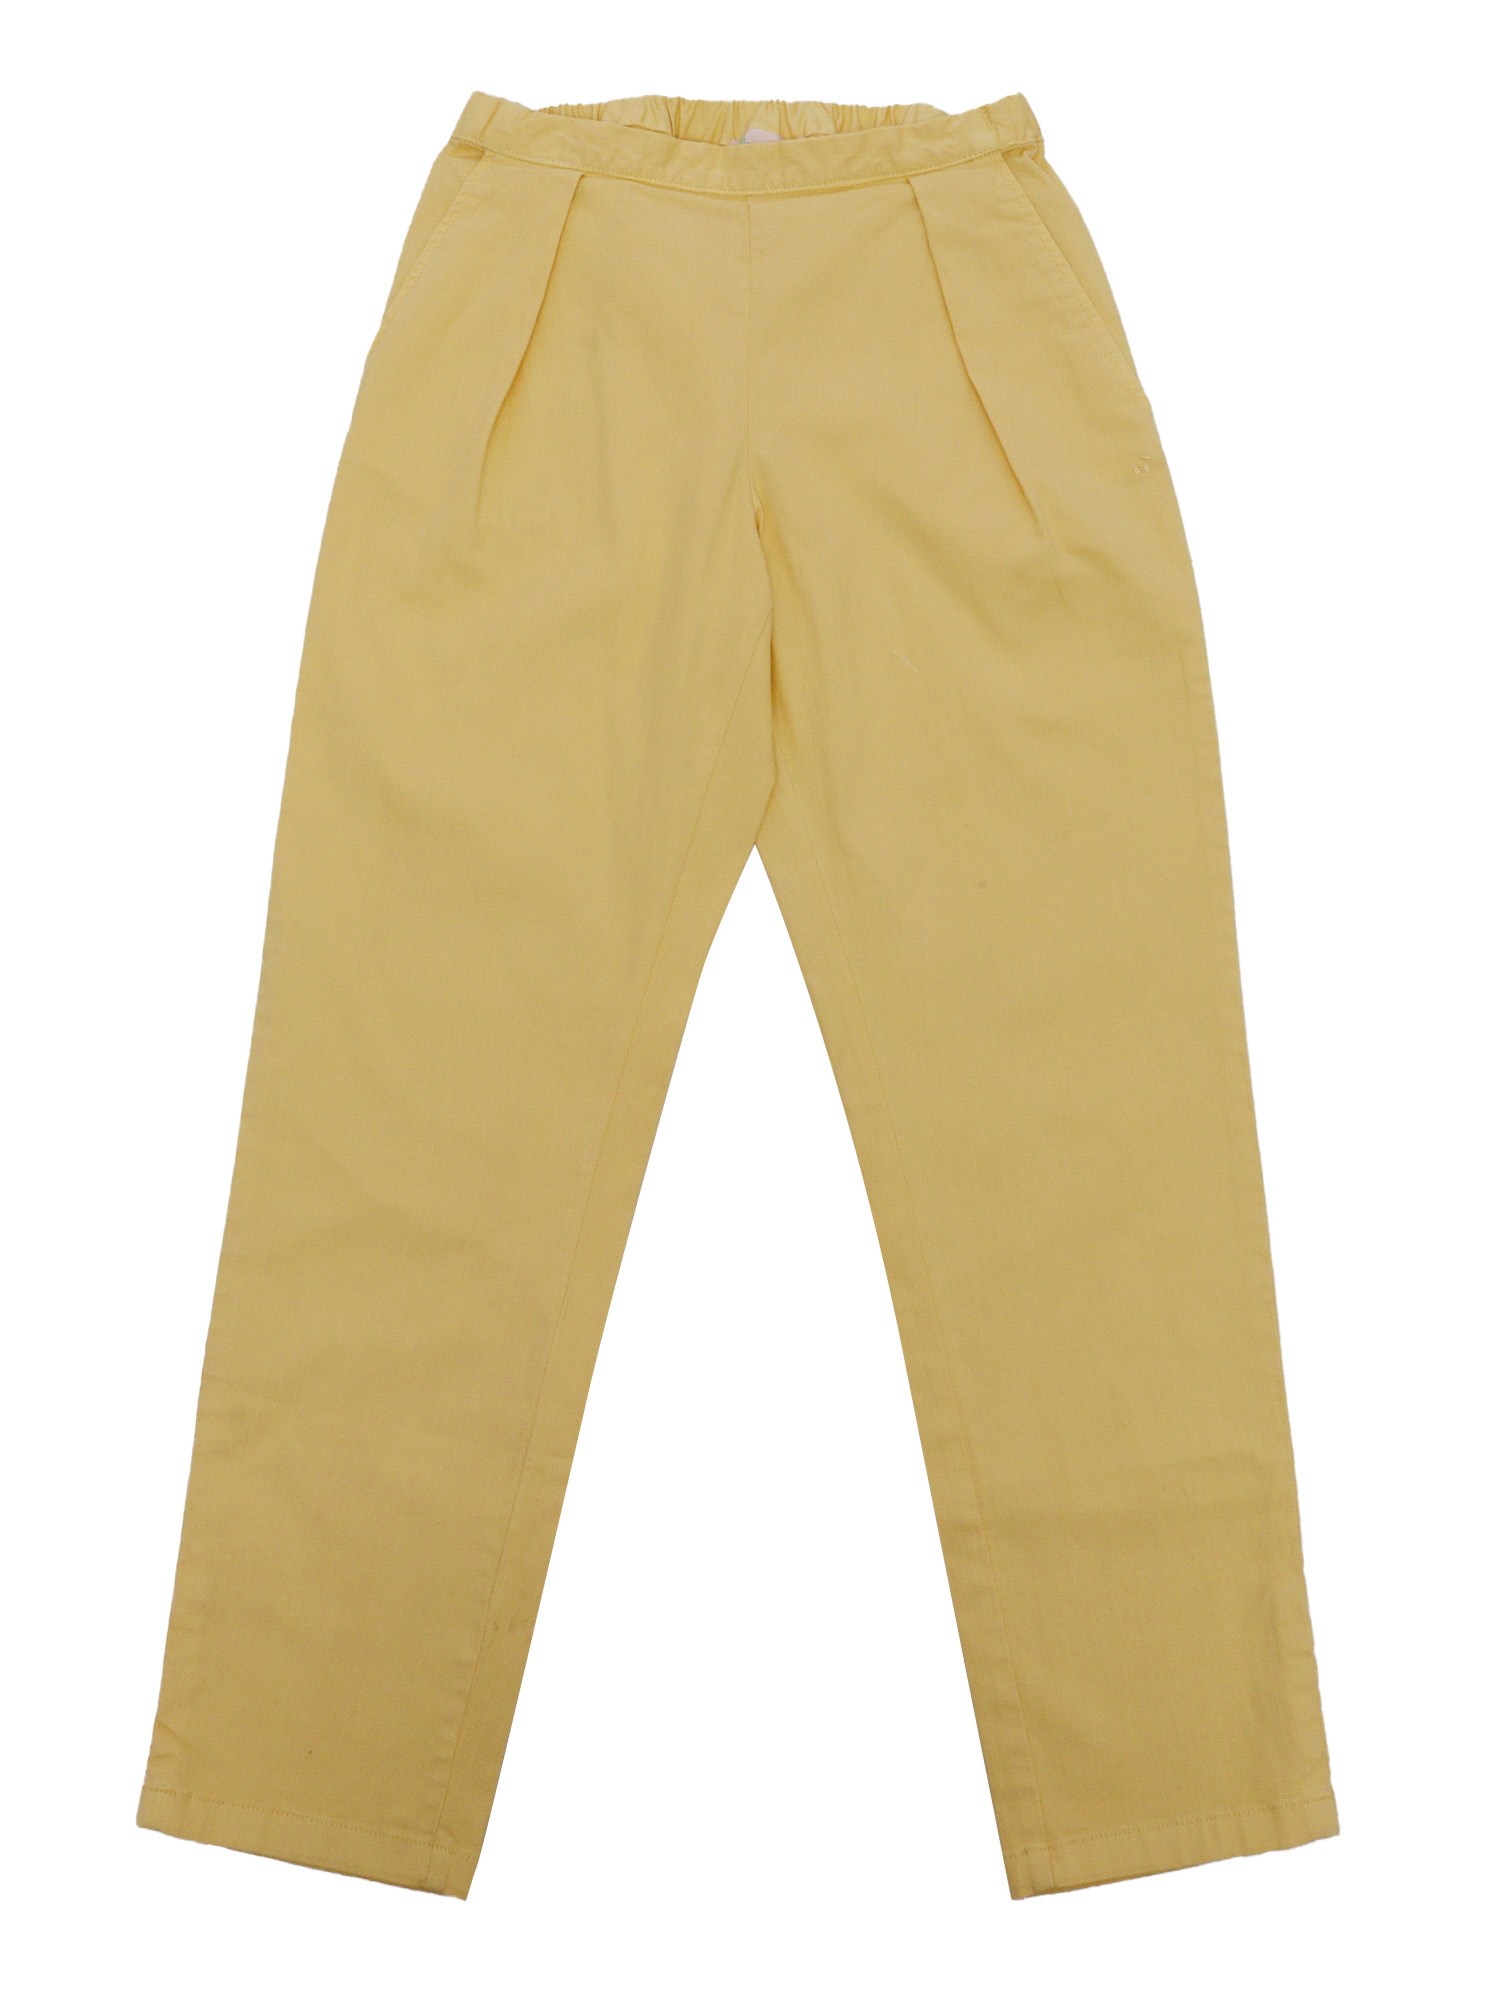 Bonpoint Yellow Callie Trousers